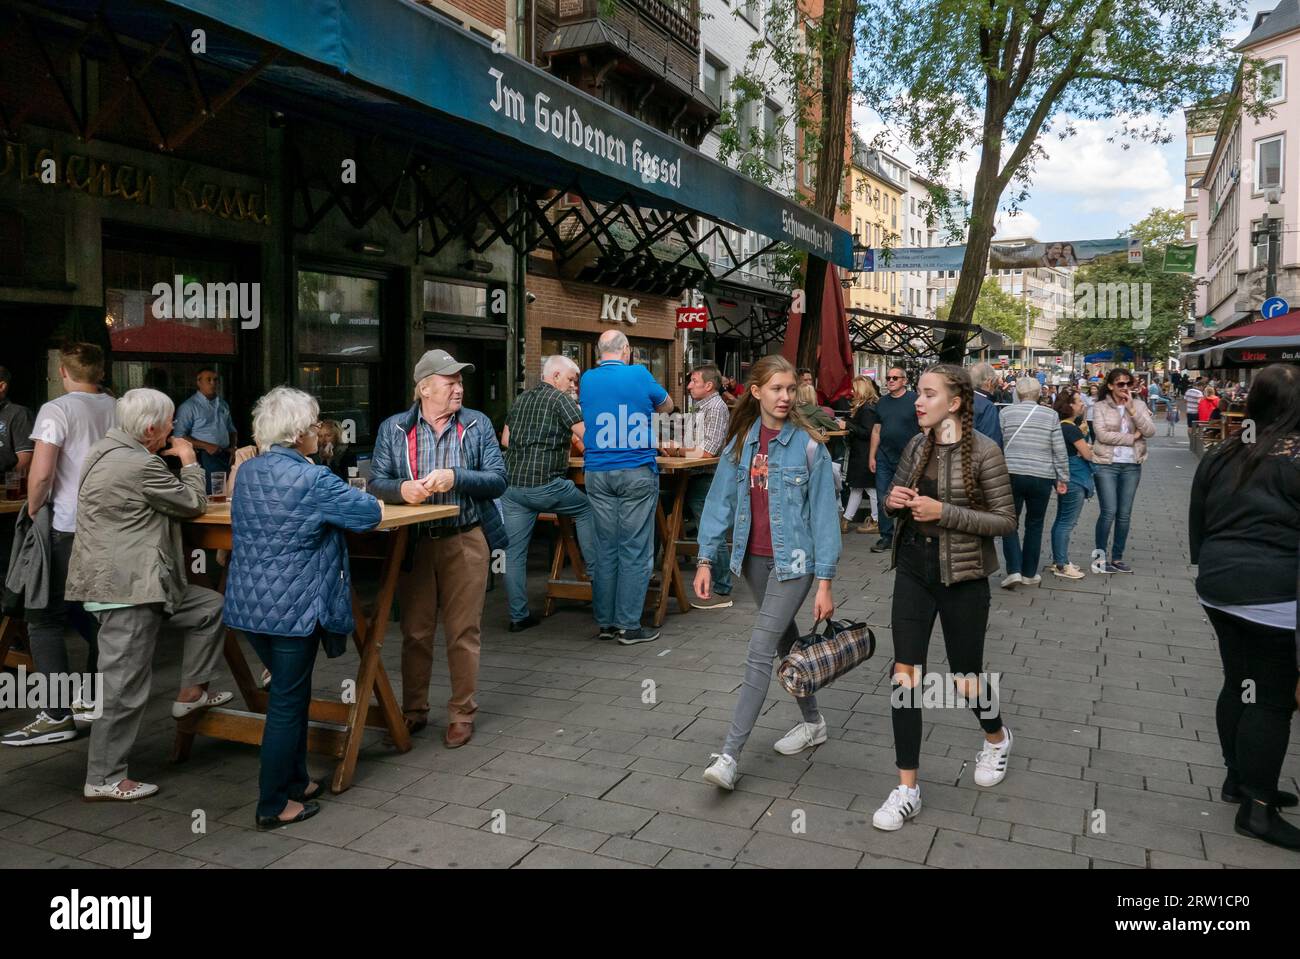 26.08.2018, Germany, North Rhine-Westphalia, Duesseldorf - Pedestrian zone with pubs in the old town. 00A180826D376CAROEX.JPG [MODEL RELEASE: NO, PROP Stock Photo